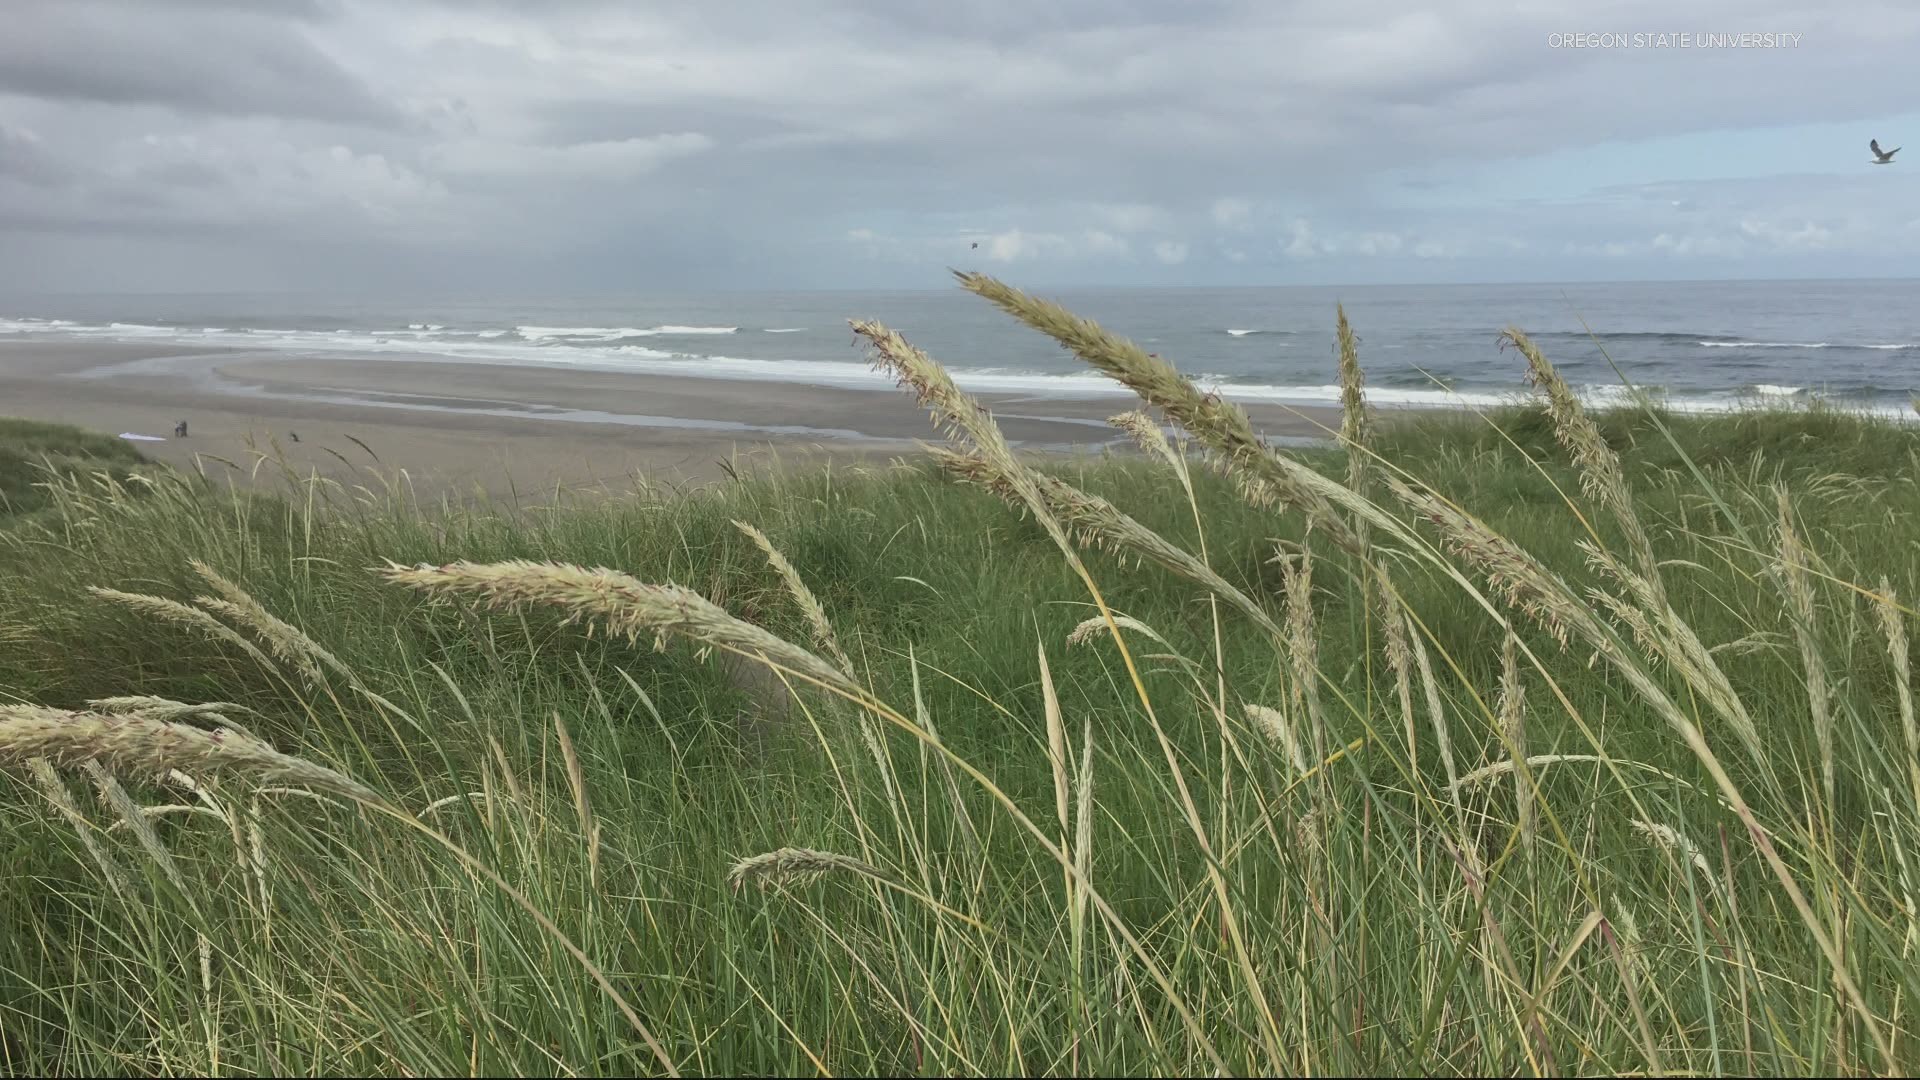 There’s a new hybrid beachgrass discovered on the Oregon and Washington coasts. Keely Chalmers explains how the invasive species could impact coastal communities.